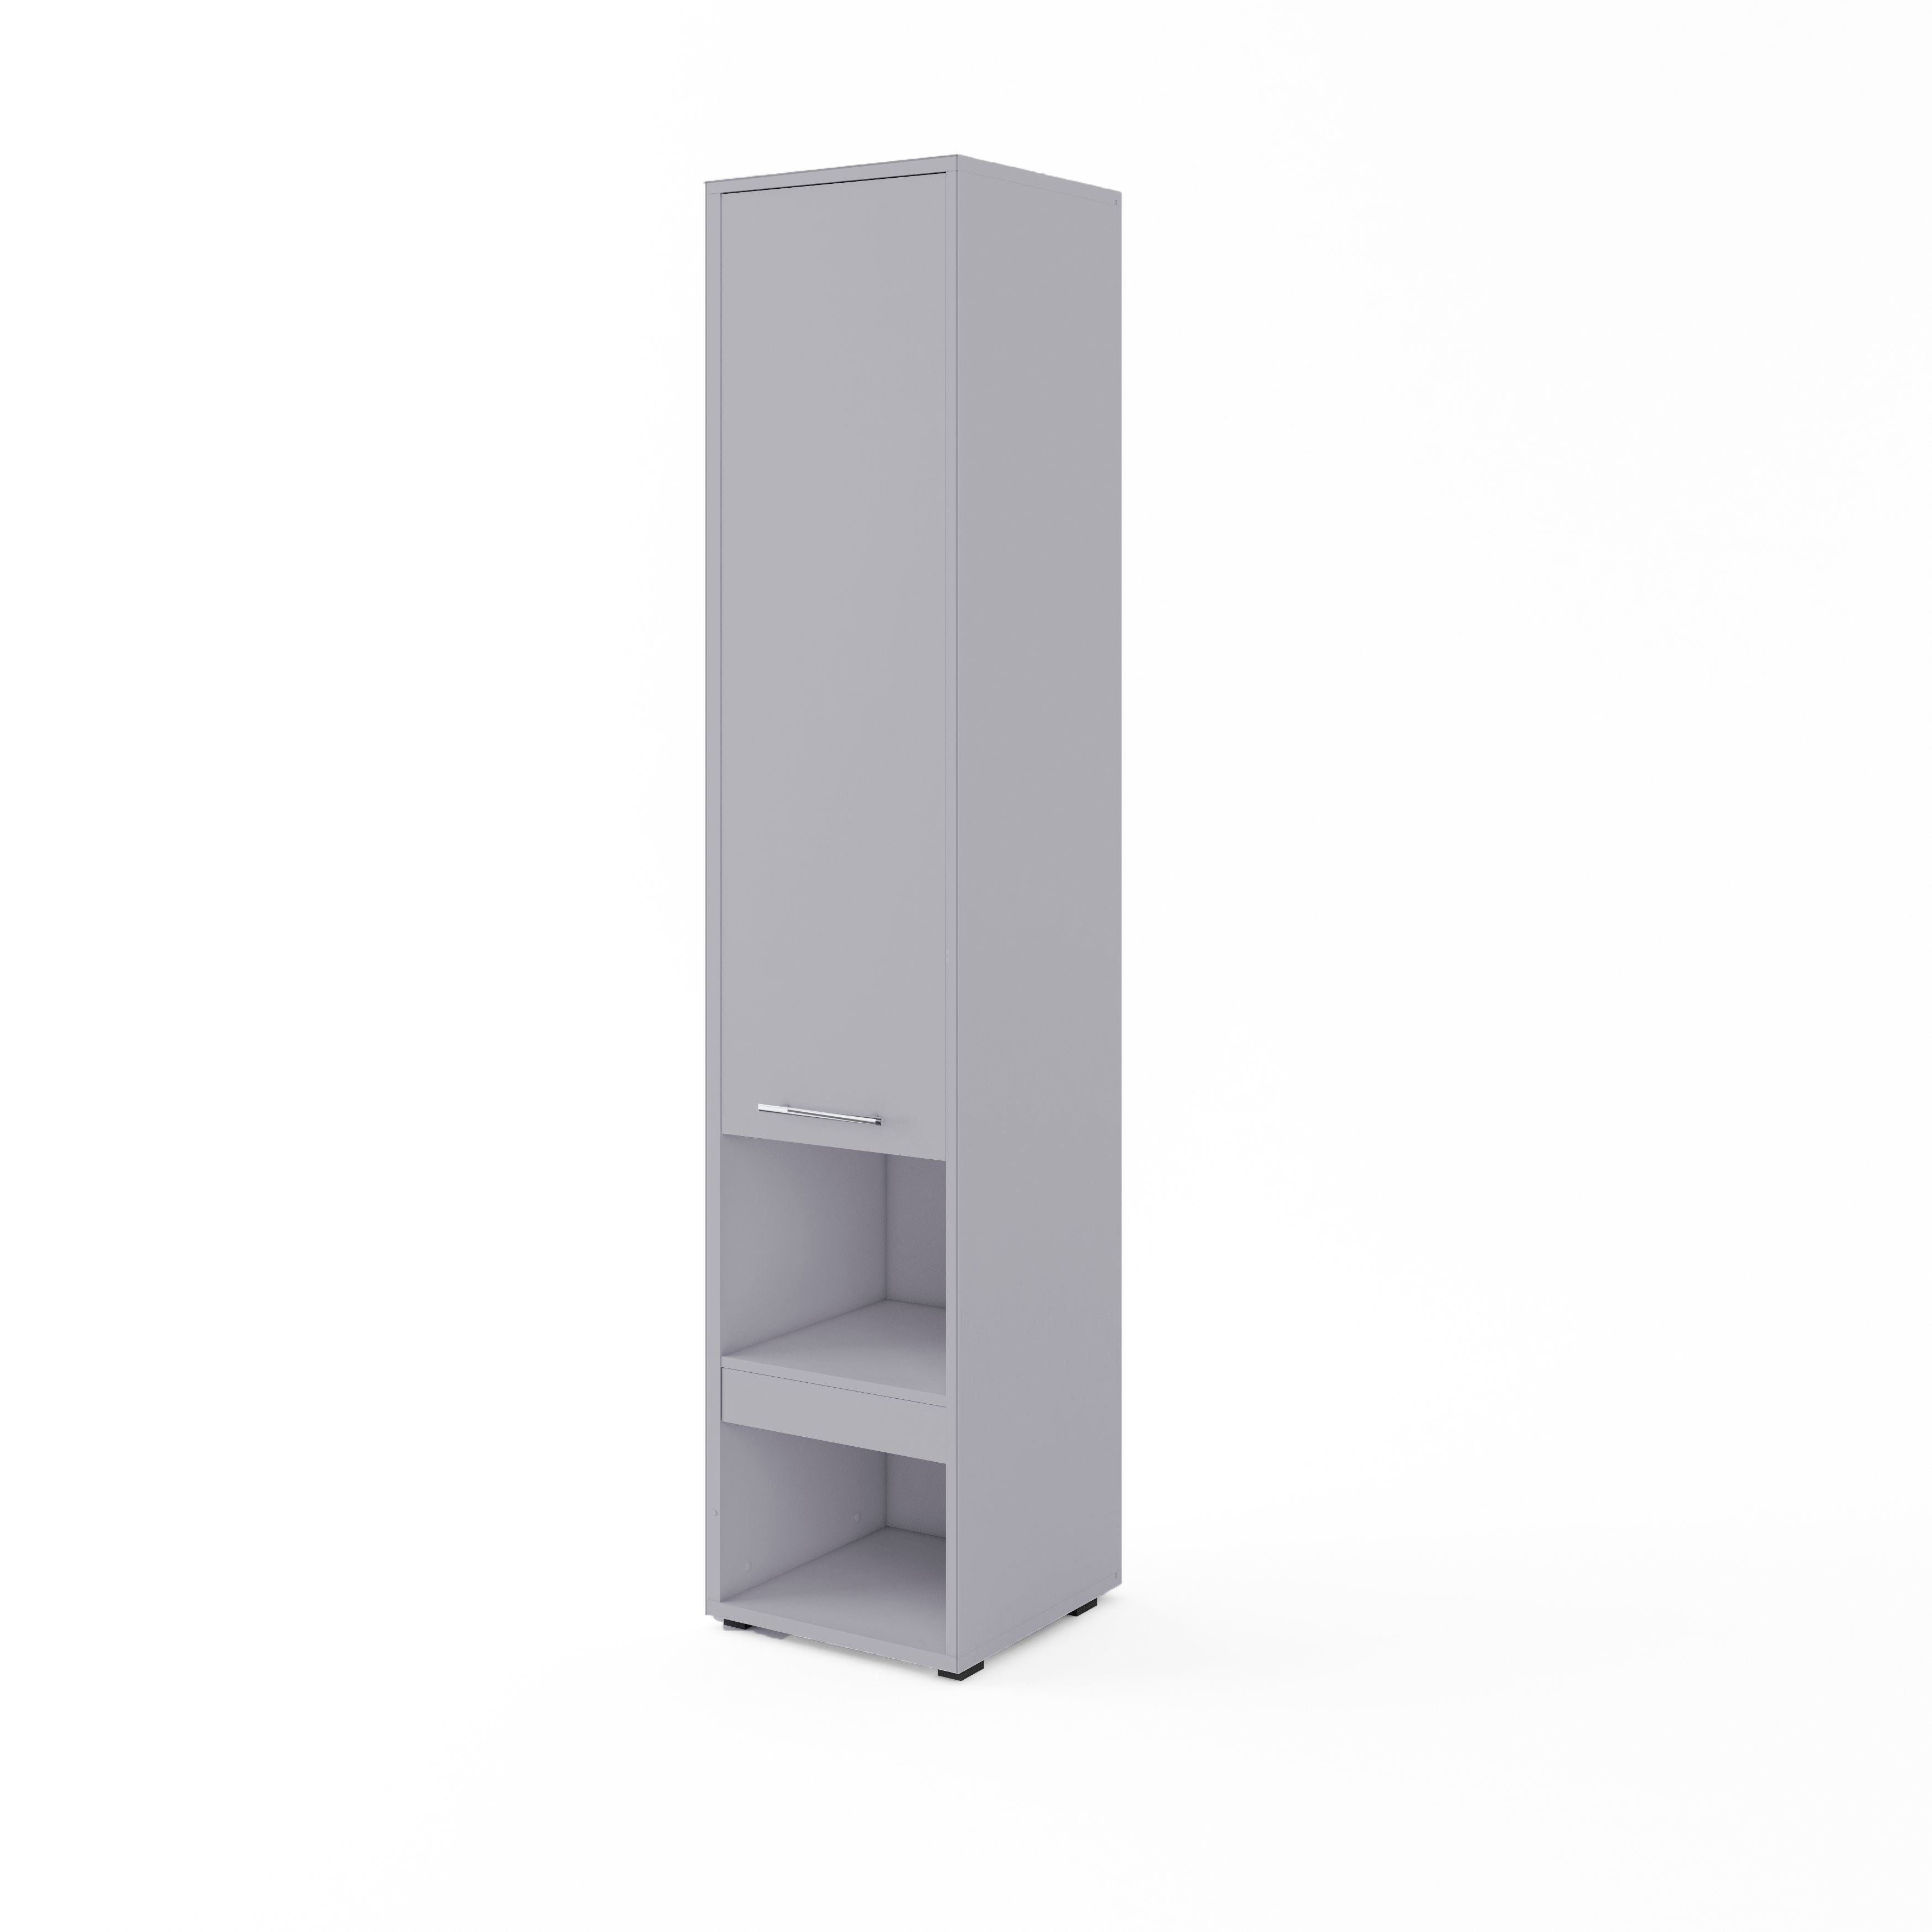 View CP07 Tall Storage Cabinet for Vertical Wall Bed Concept Grey Matt 45cm information